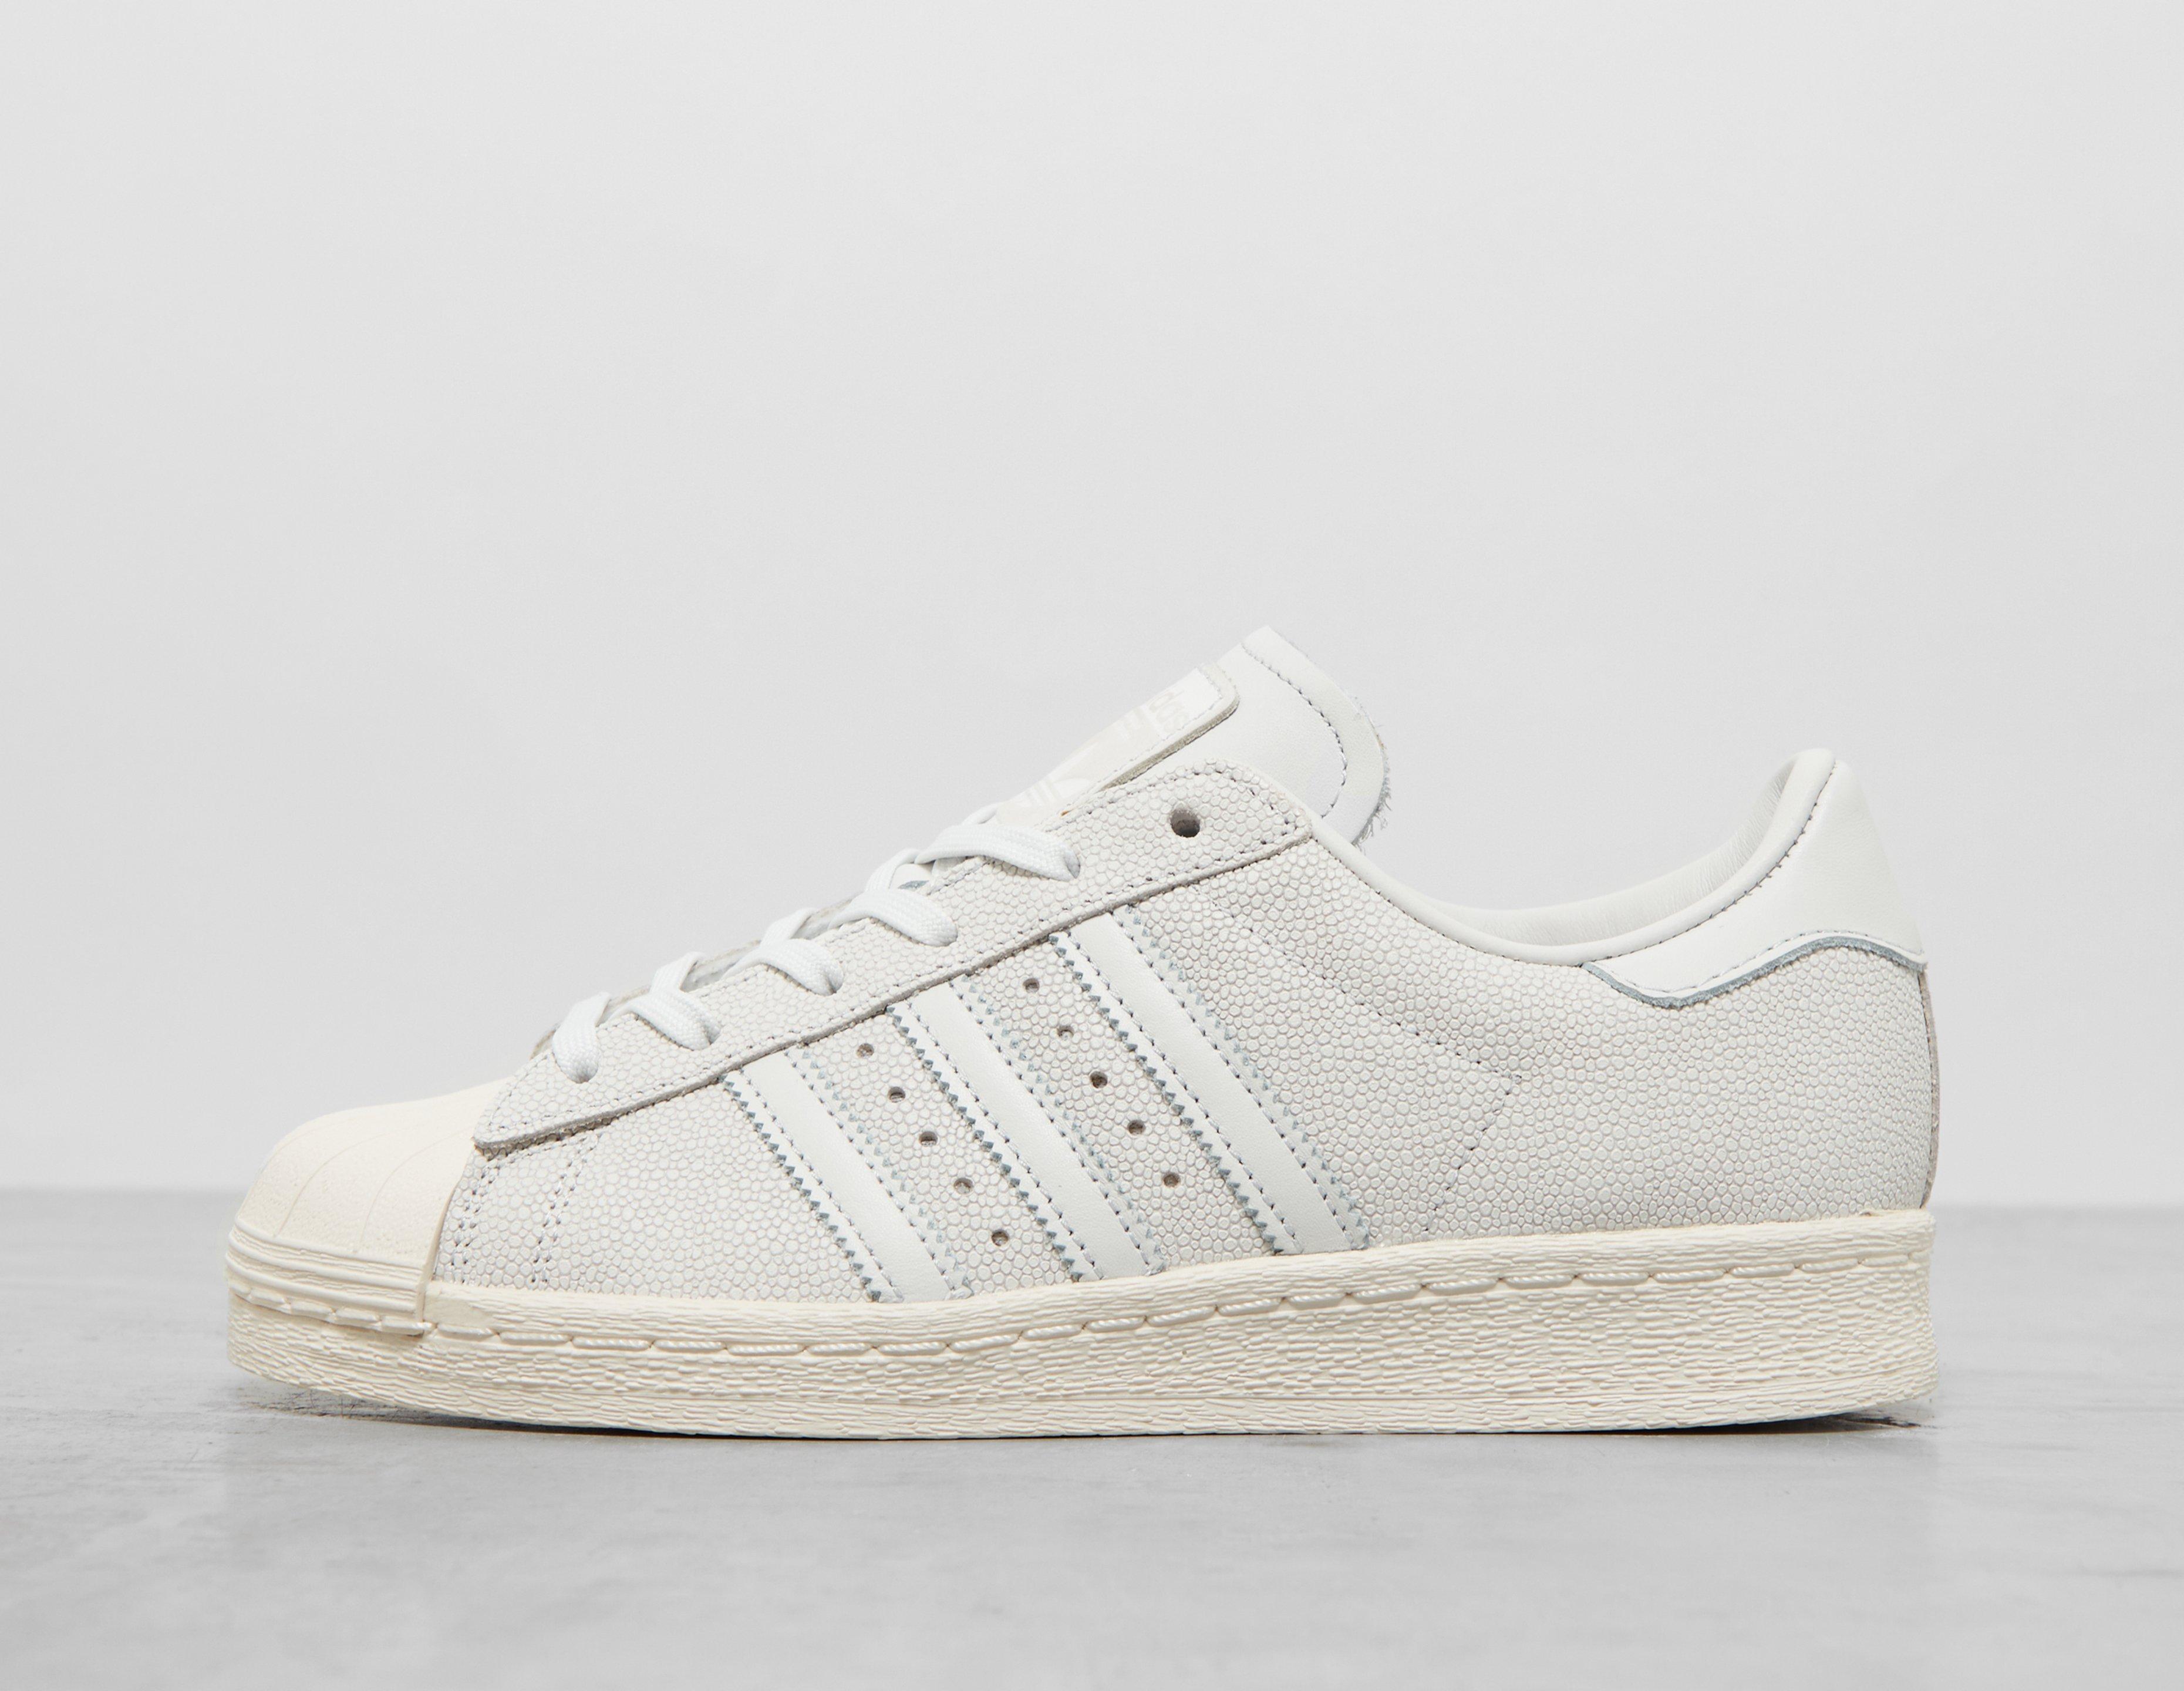 commercial | originals champs adidas piping pack | x 82 White Originals Superstar Women\'s with adicolor adidas HealthdesignShops